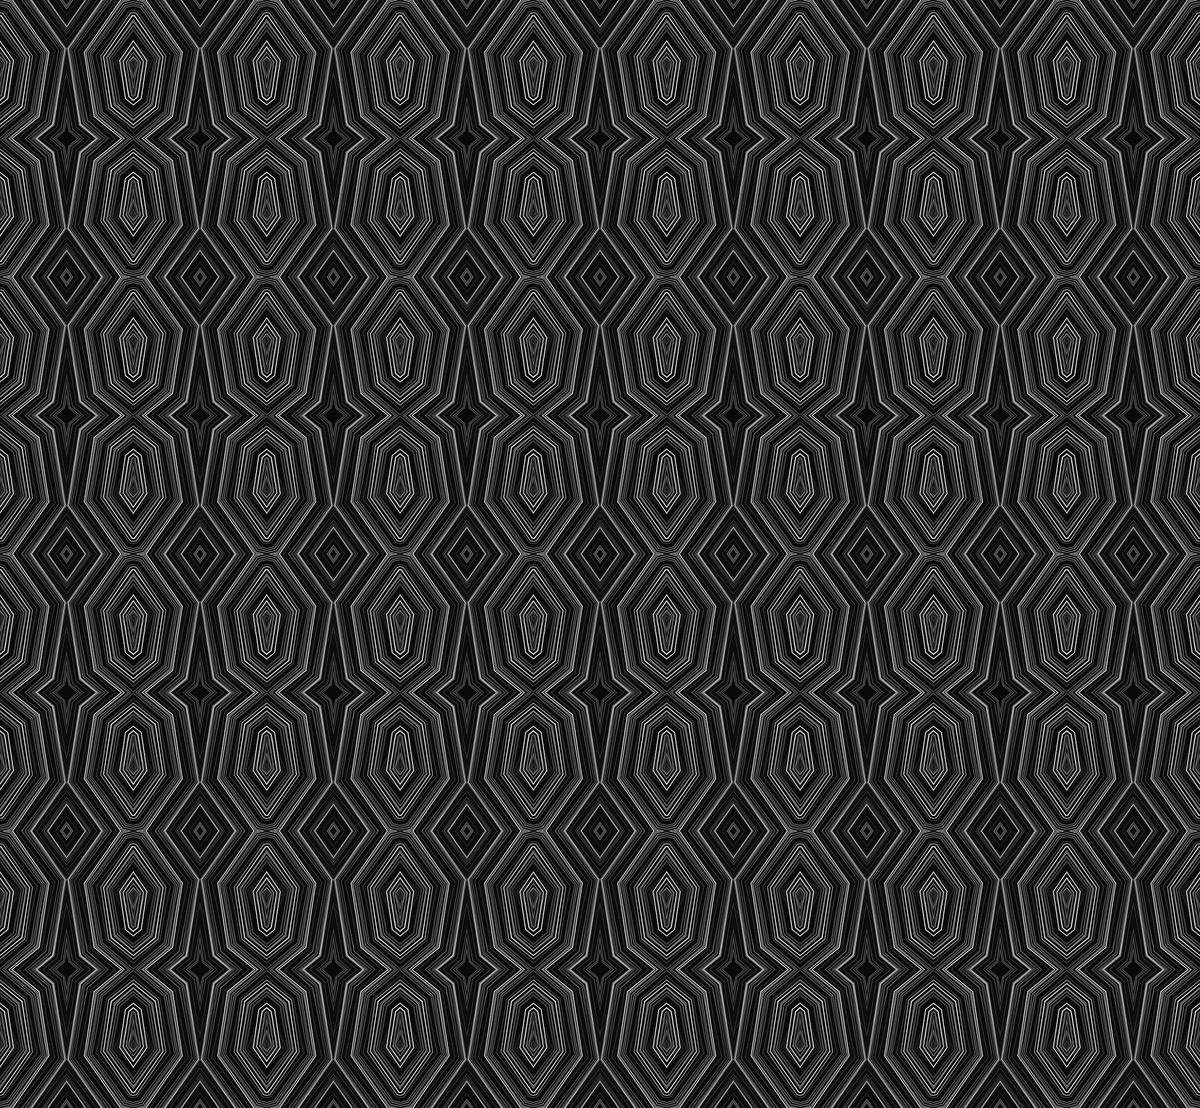 Keyhole pattern in black and white